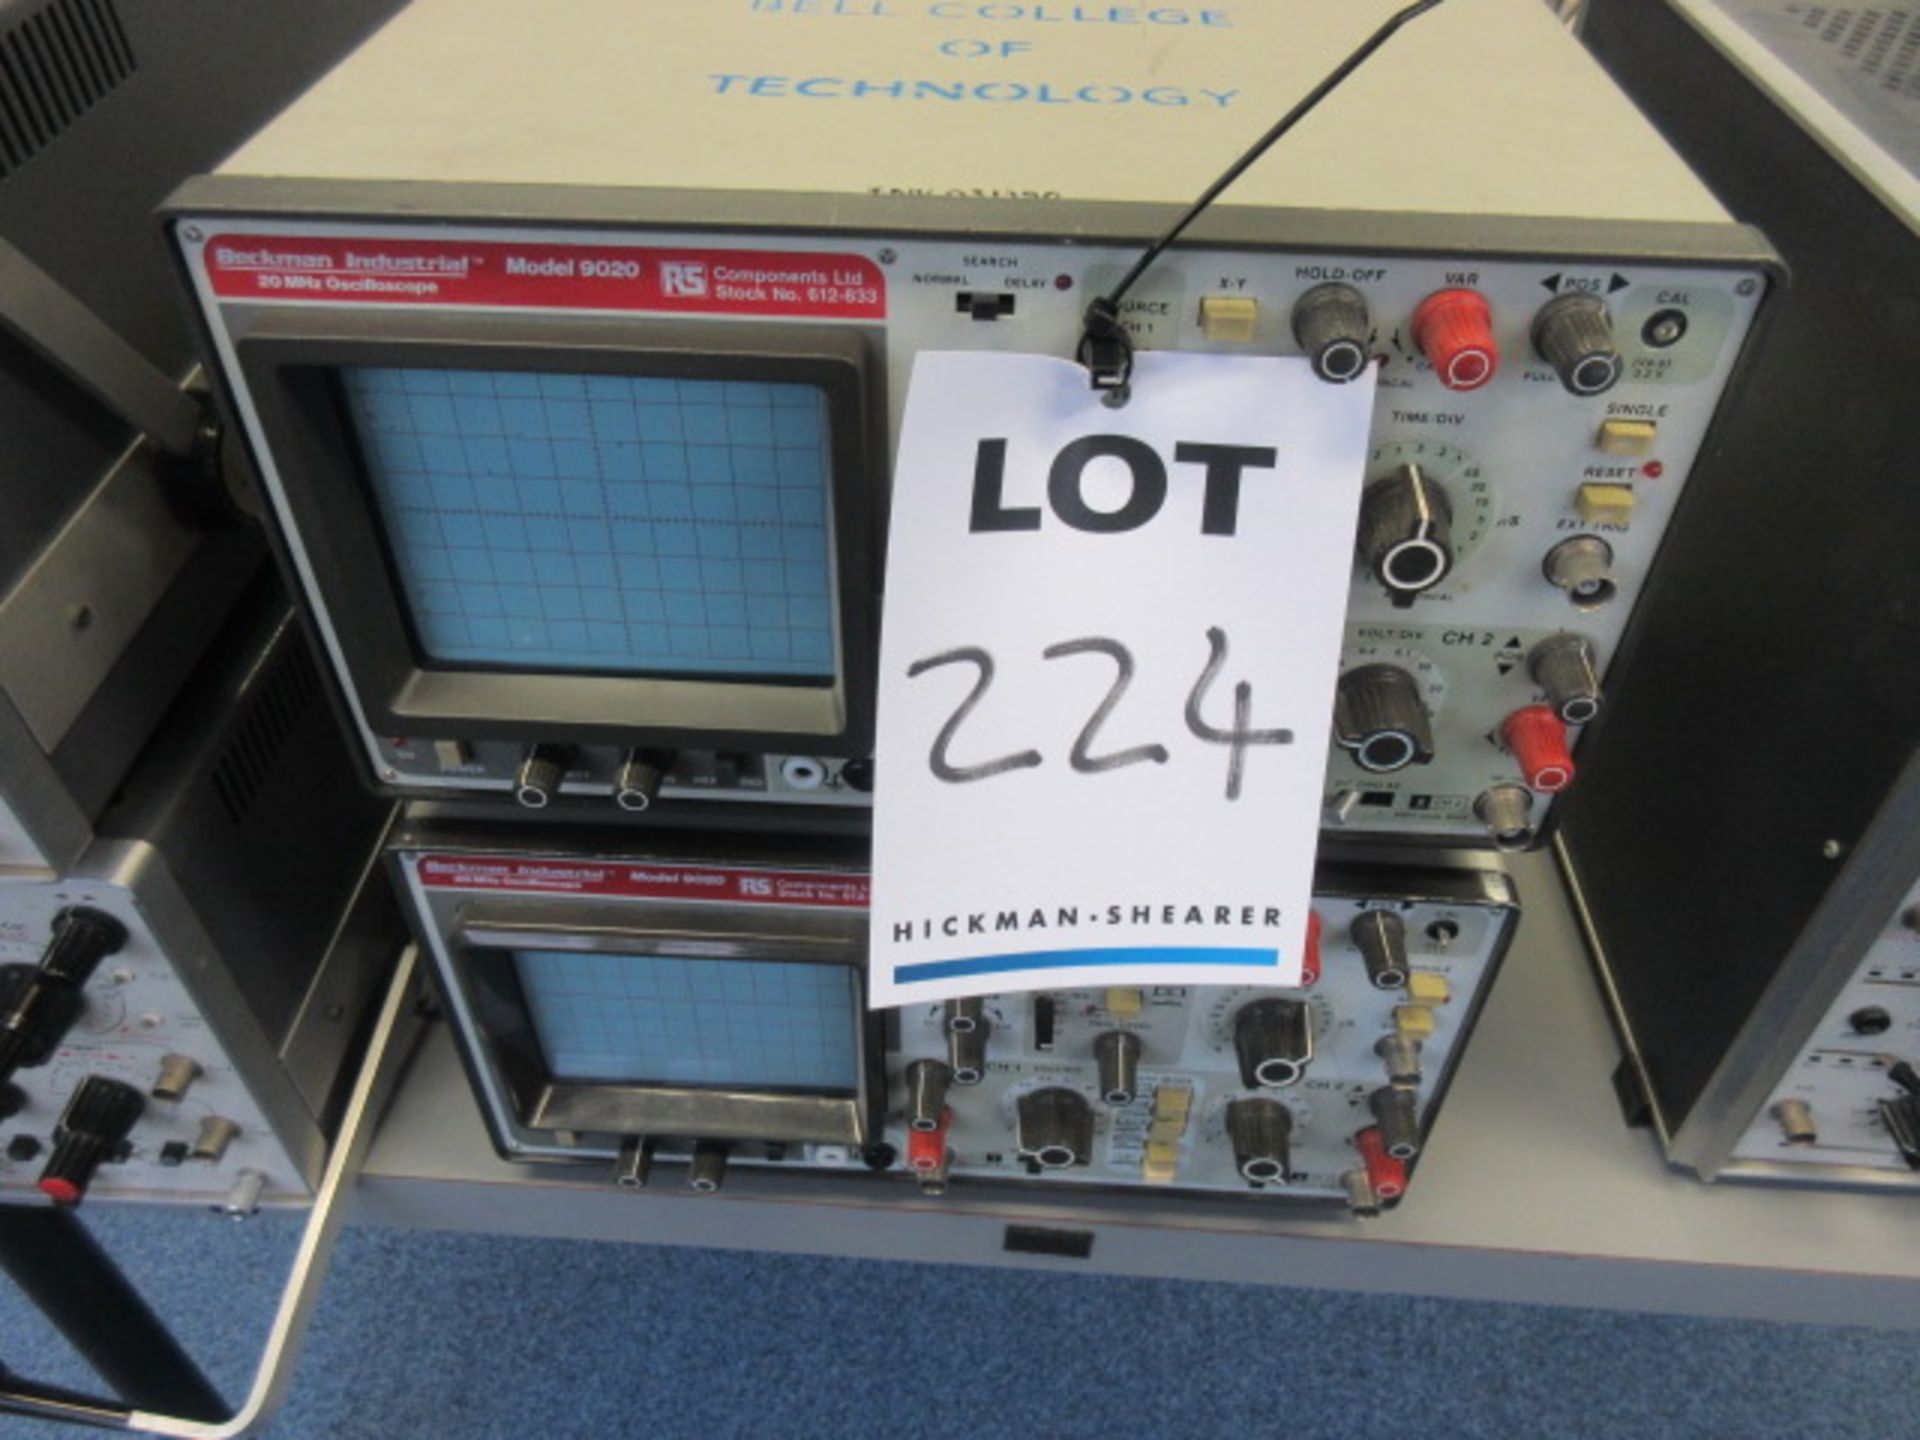 TWO BECKMAN INDUSTRIAL 20 MHz 9020 OSCILLOSCOPES - Image 3 of 3